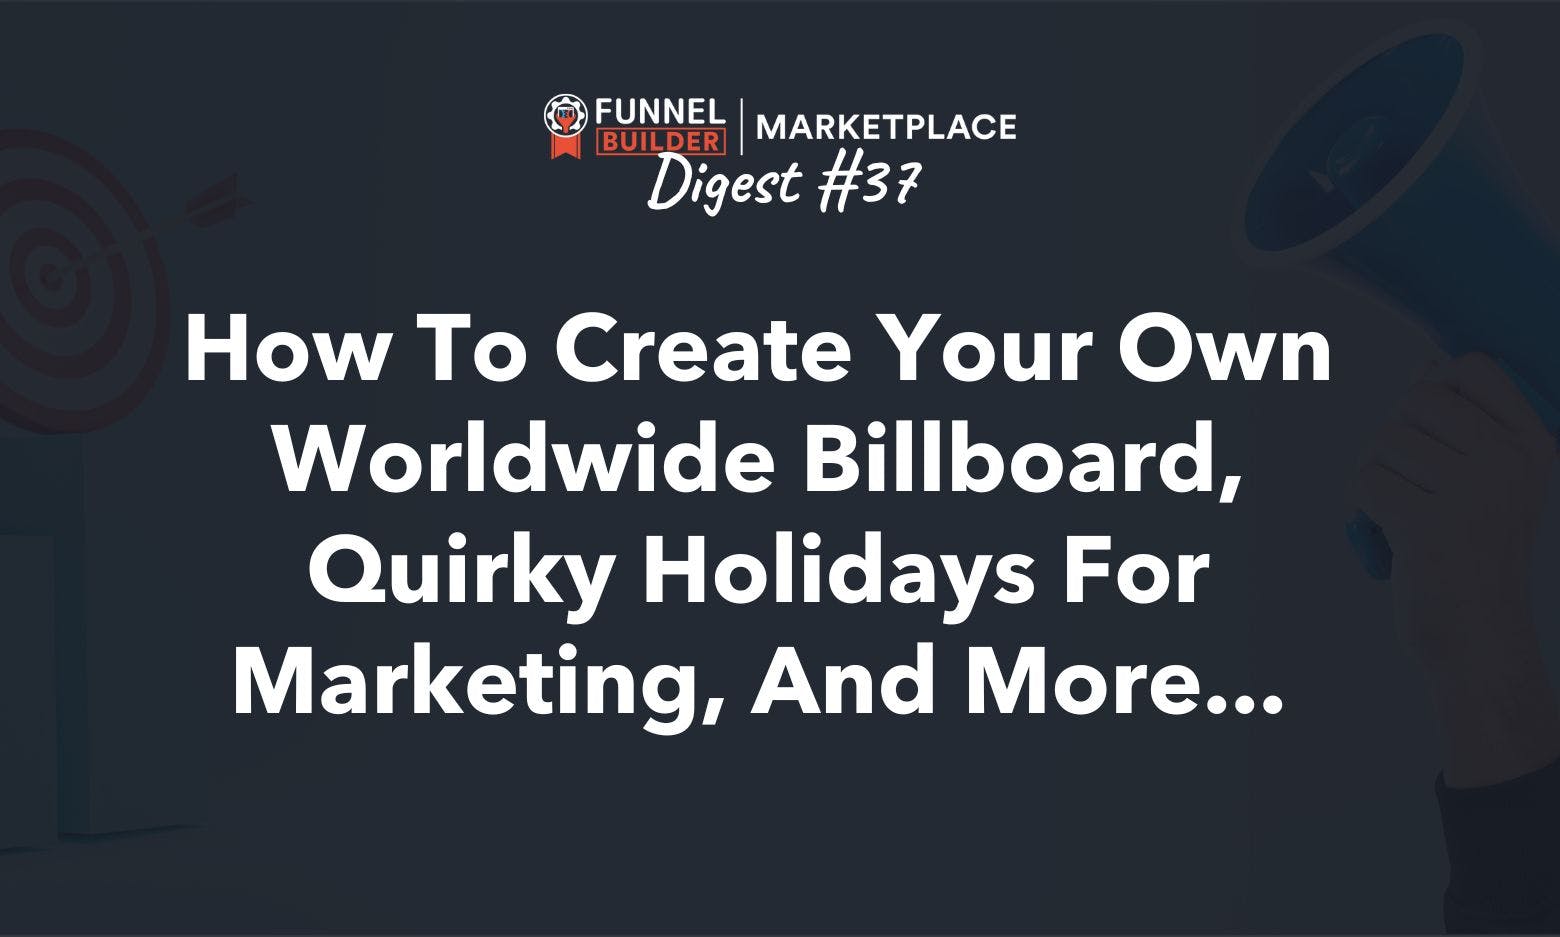 FBM Digest #37: How to create your own worldwide billboard, quirky holidays for marketing, and more...